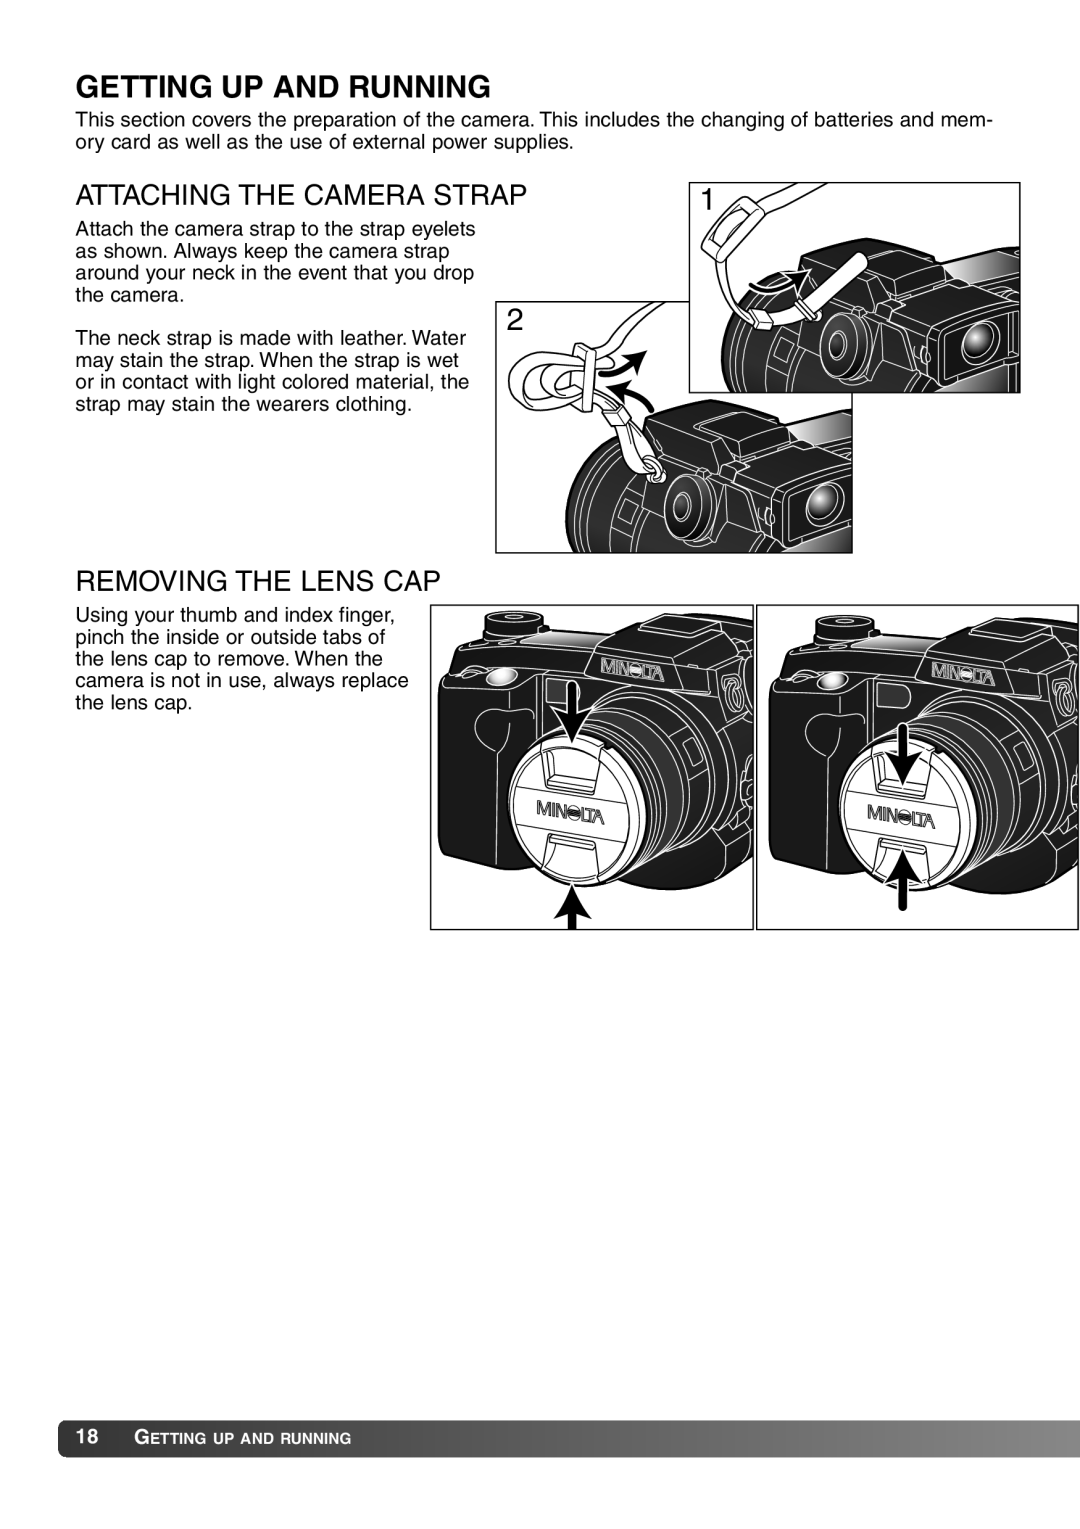 Konica Minolta 7Hi instruction manual Getting UP and Running, Attaching the Camera Strap, Removing the Lens CAP 